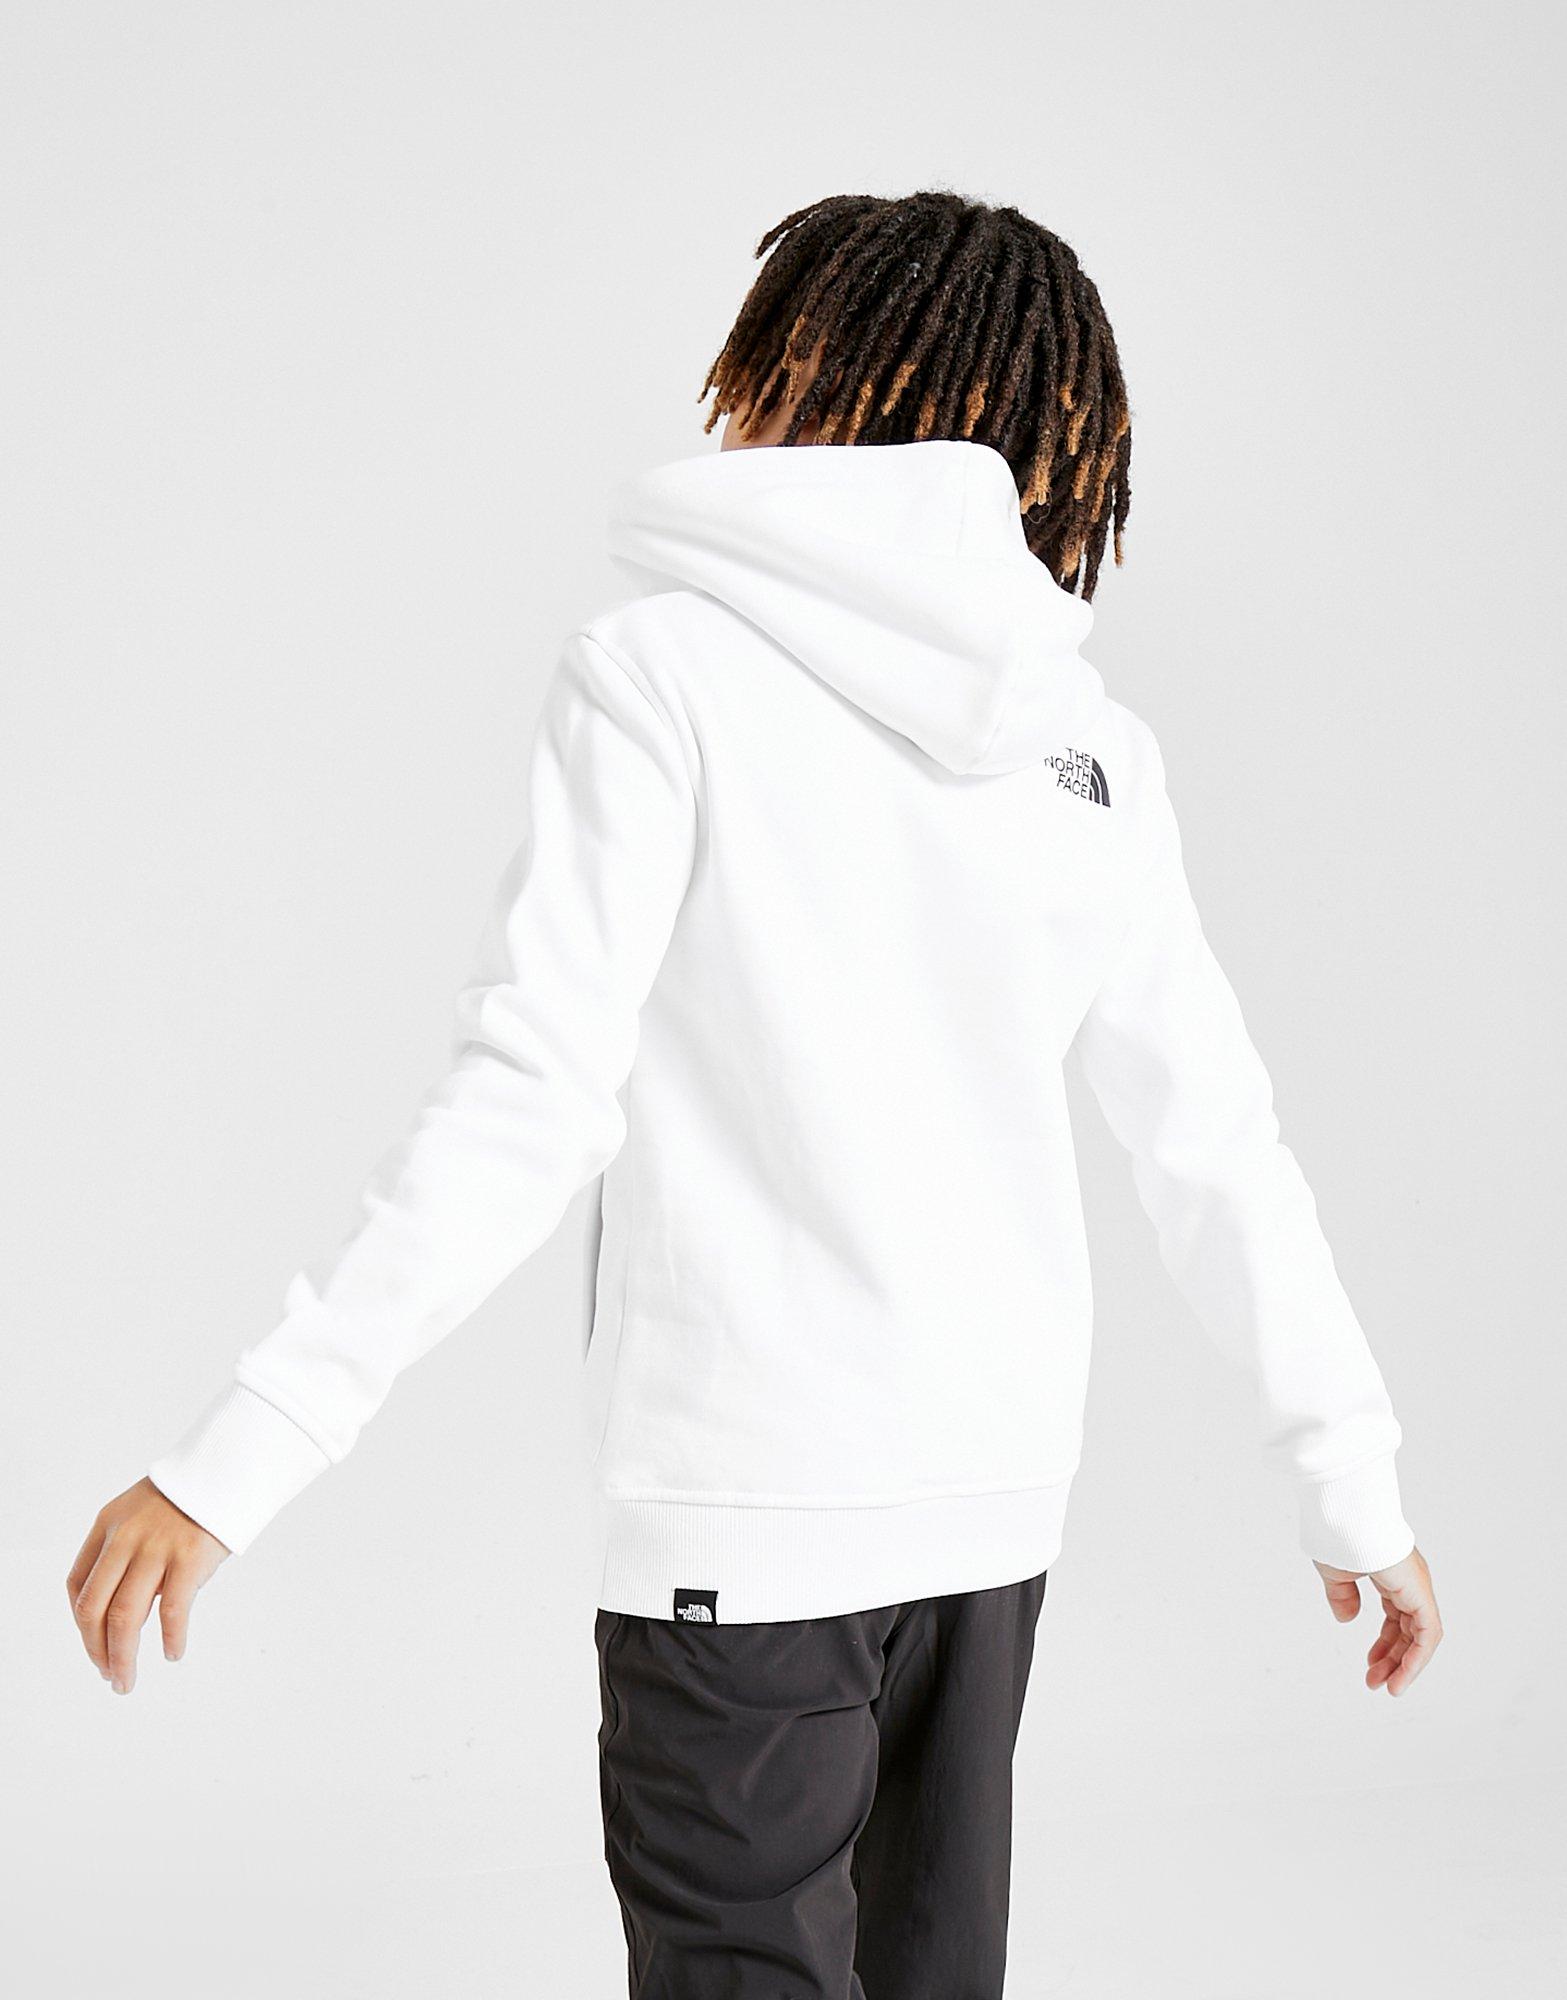 the north face hoodie junior